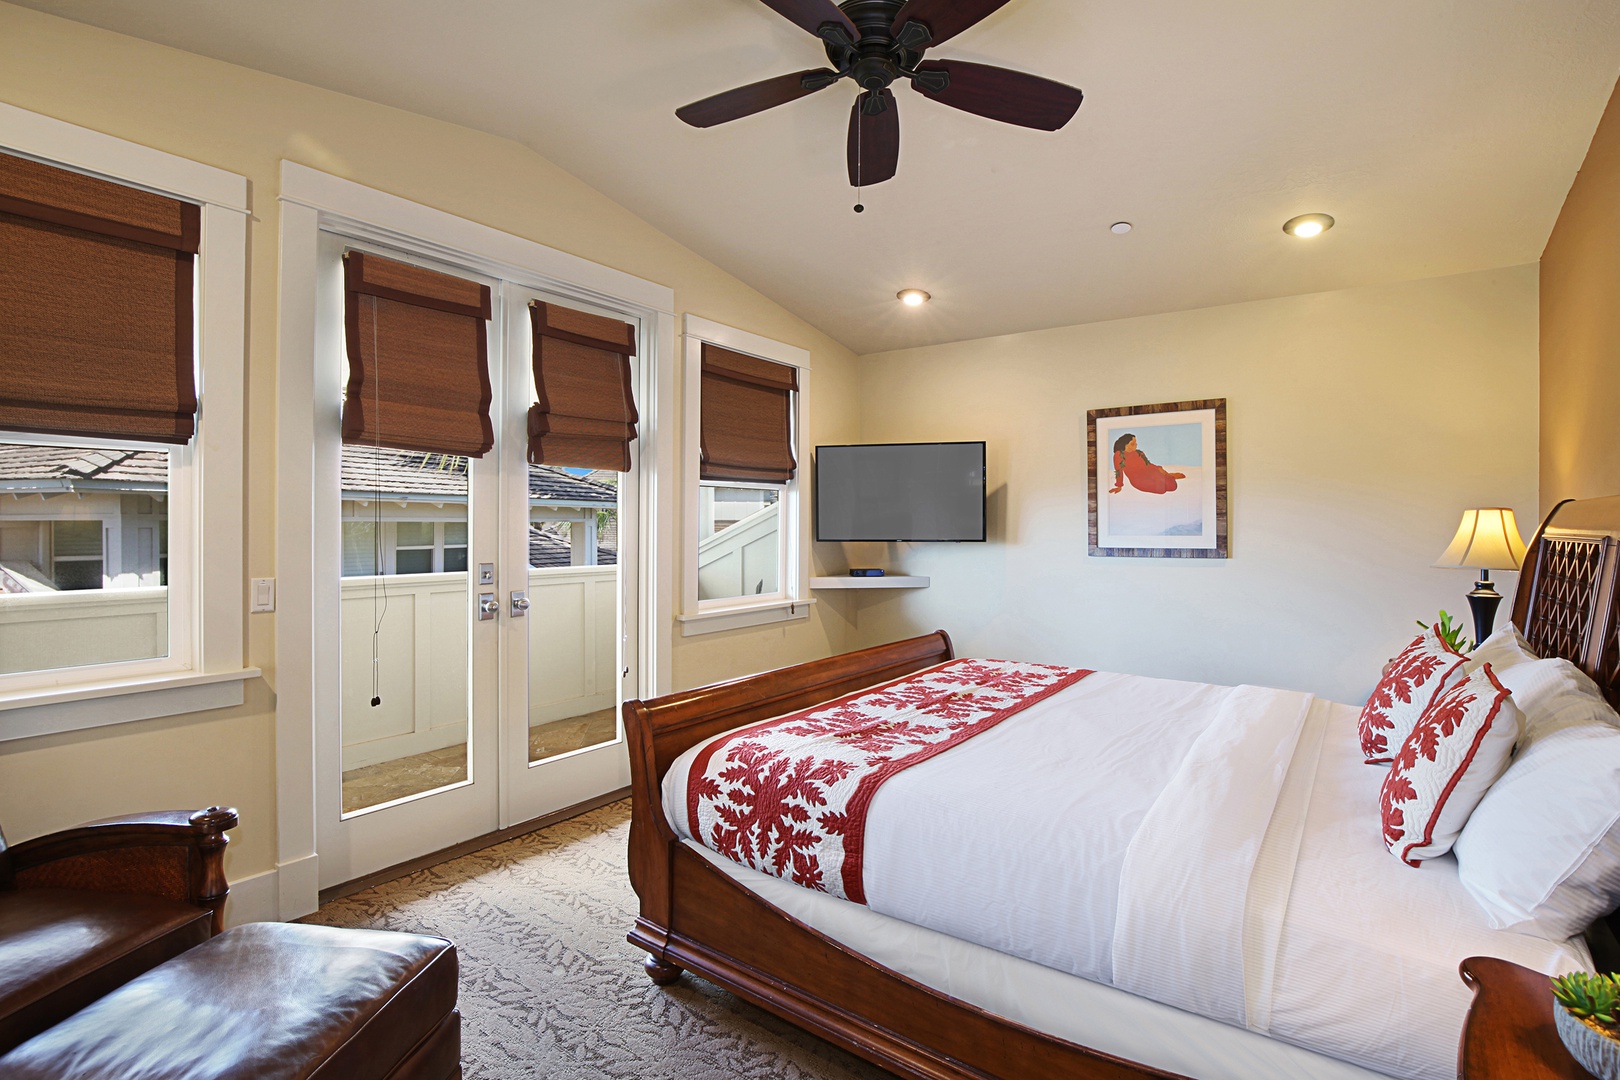 Koloa Vacation Rentals, Villas at Poipu Kai B300 - Guest bedroom 3 with a queen bed and lanai.